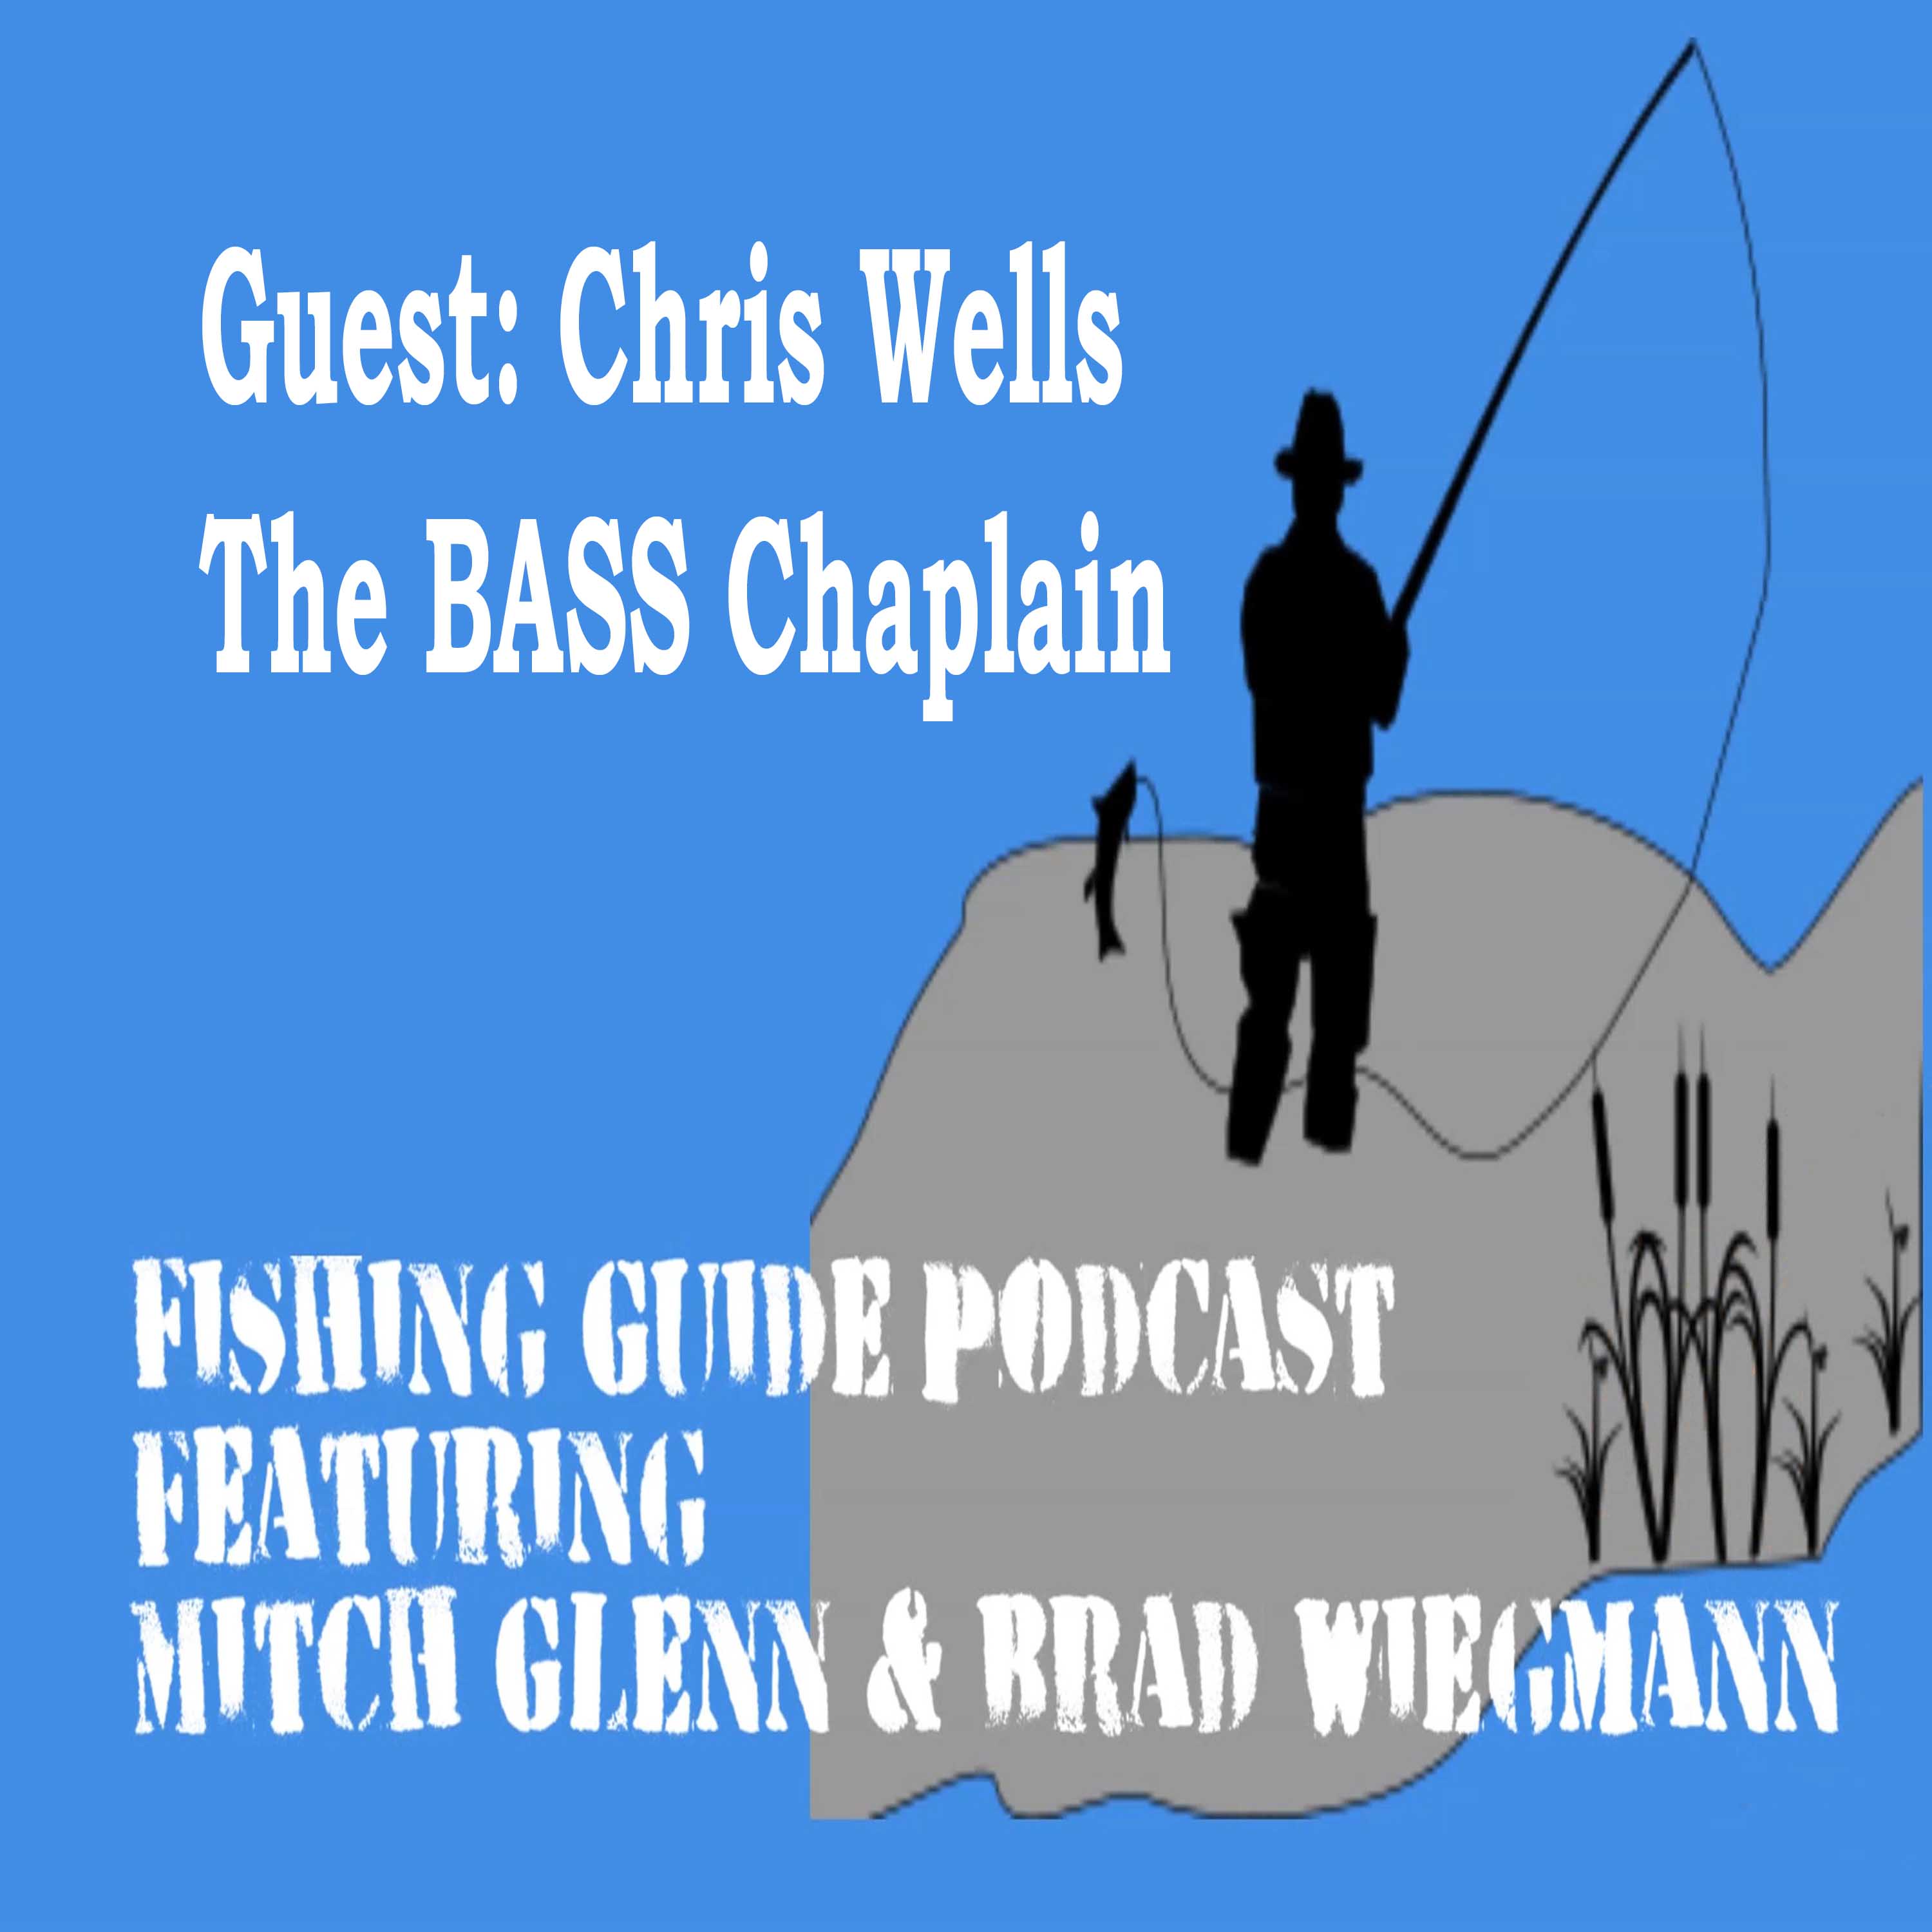 Chris Wells aka The BASS Chaplain visits about being a full time Evangelist and for the Bassmaster Elite Series and Major League Fishing: Episode 13